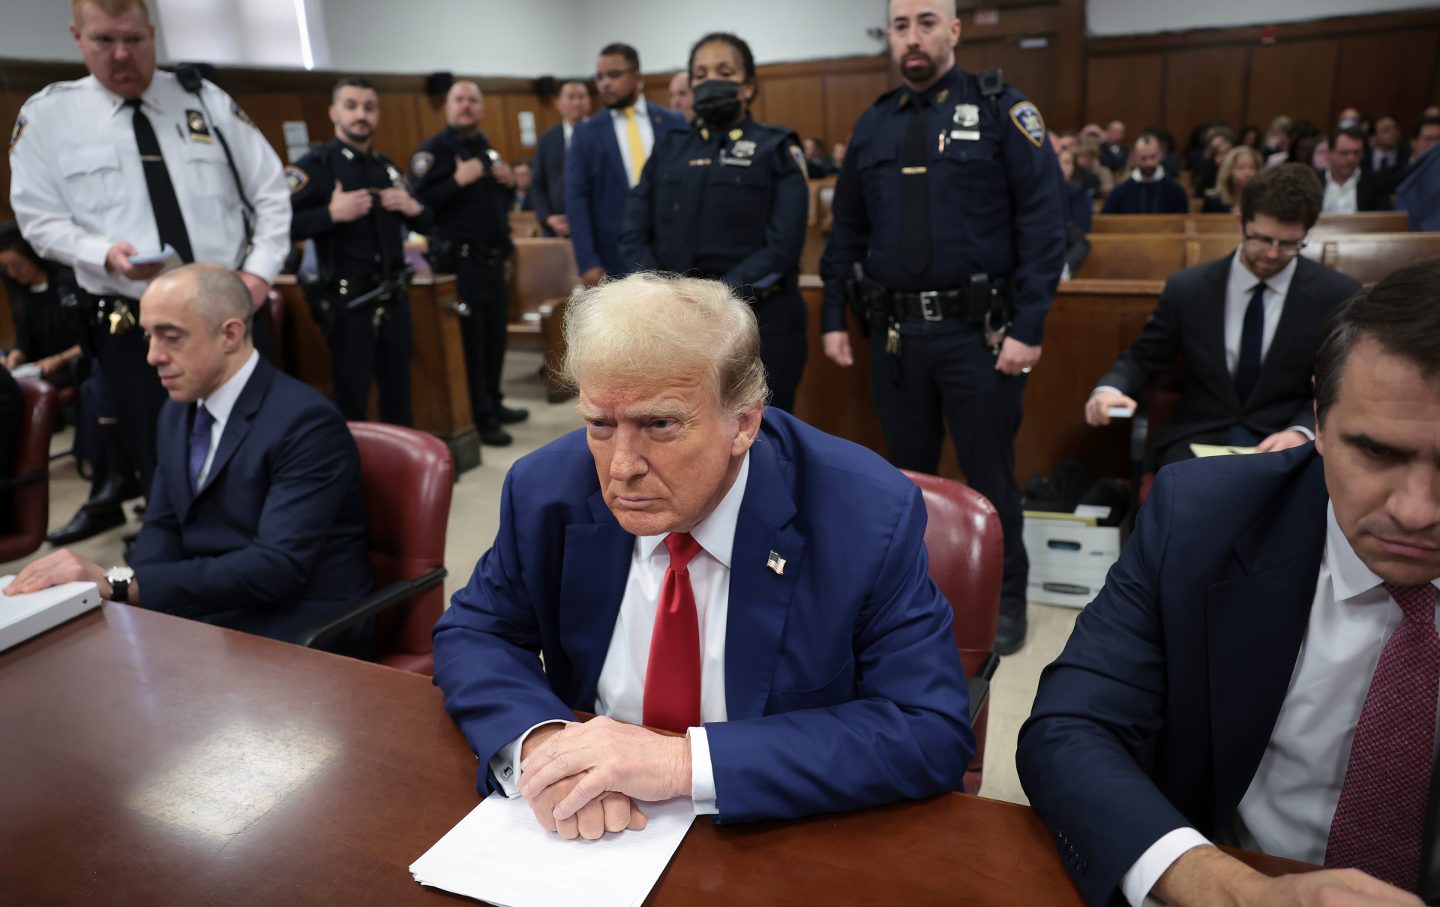 Donald Trump in court sitting at the defendant's table, flanked by his lawyers.